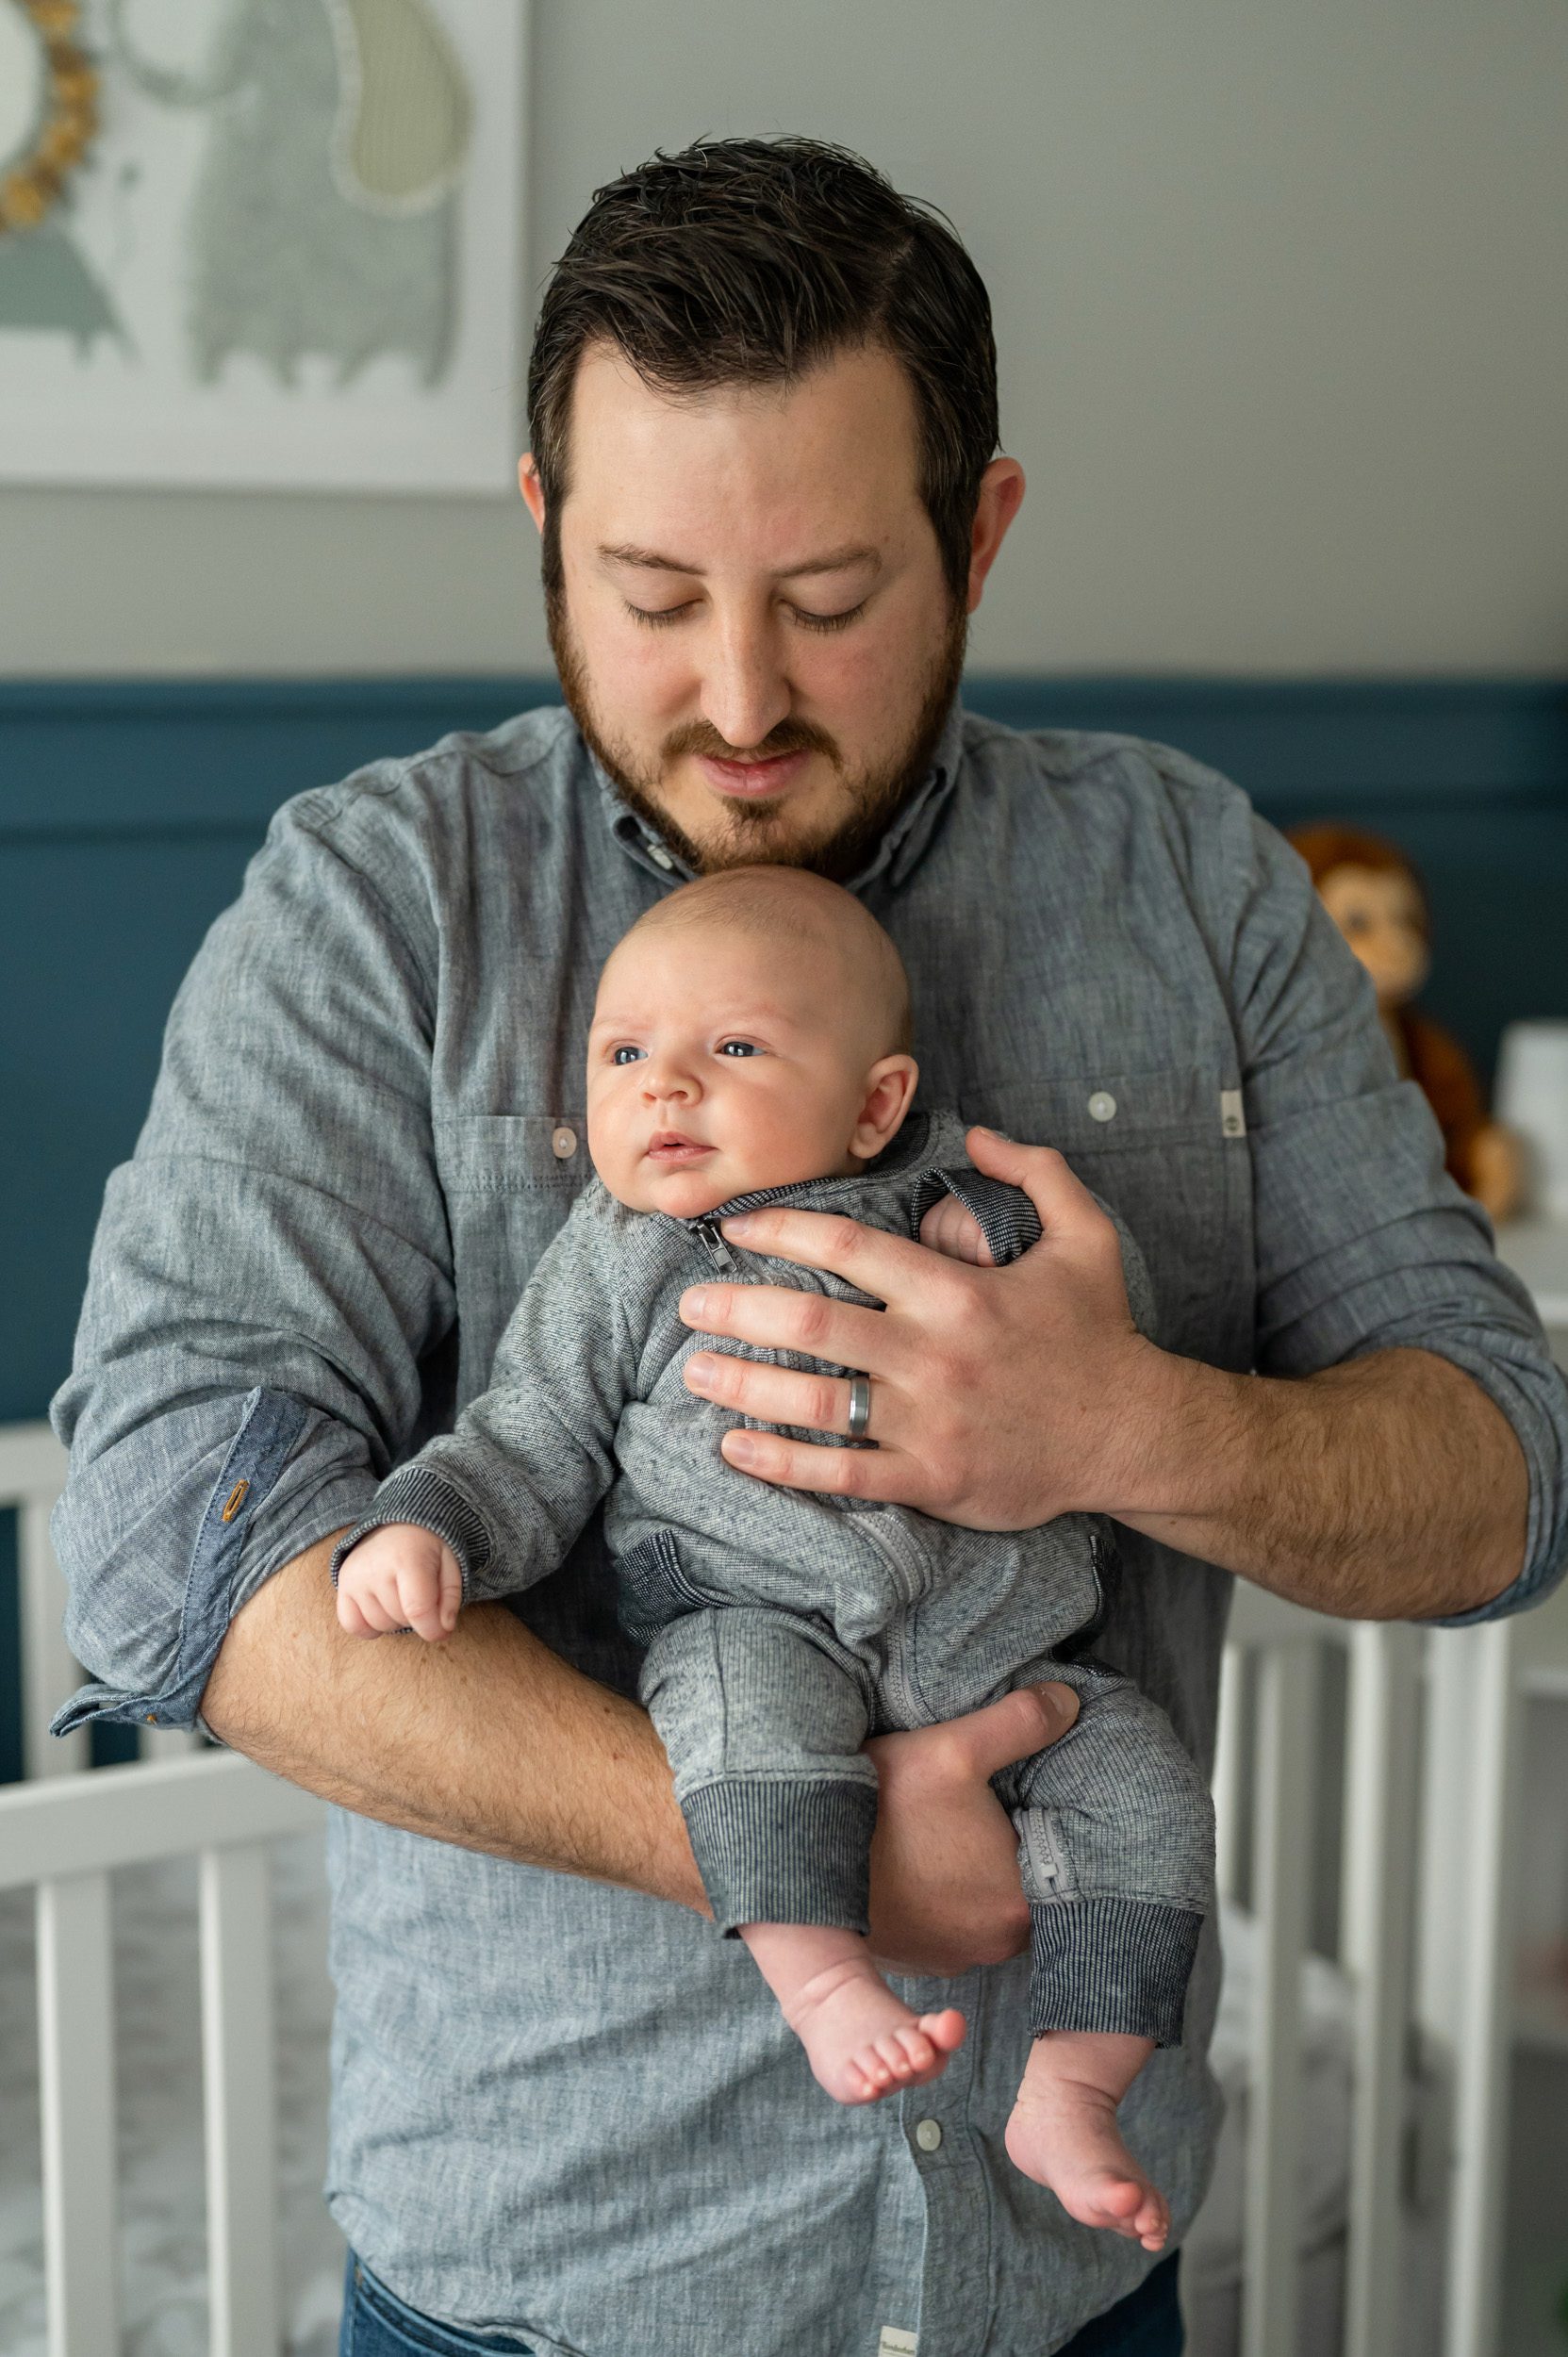 A new father holding his newborn baby boy and smiling down at him during a gilbertsville home newborn photoshoot